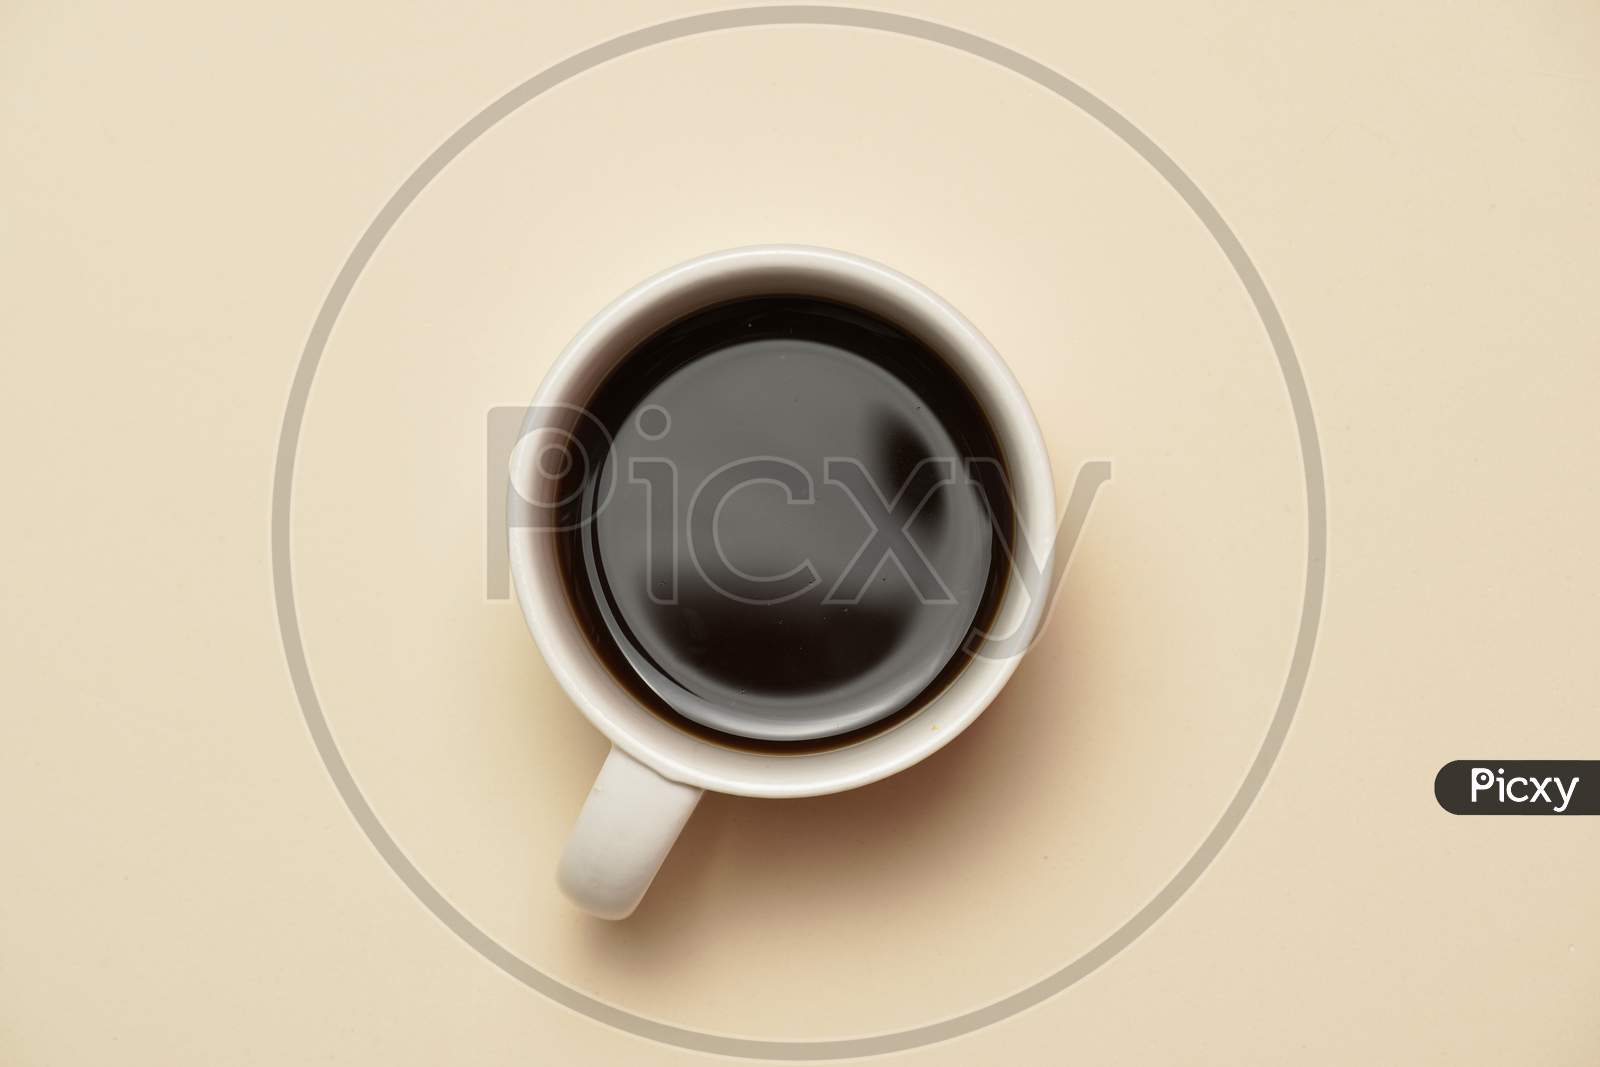 Top View Of Cup Of Coffee On Pale Orange Background. Flat Lay.